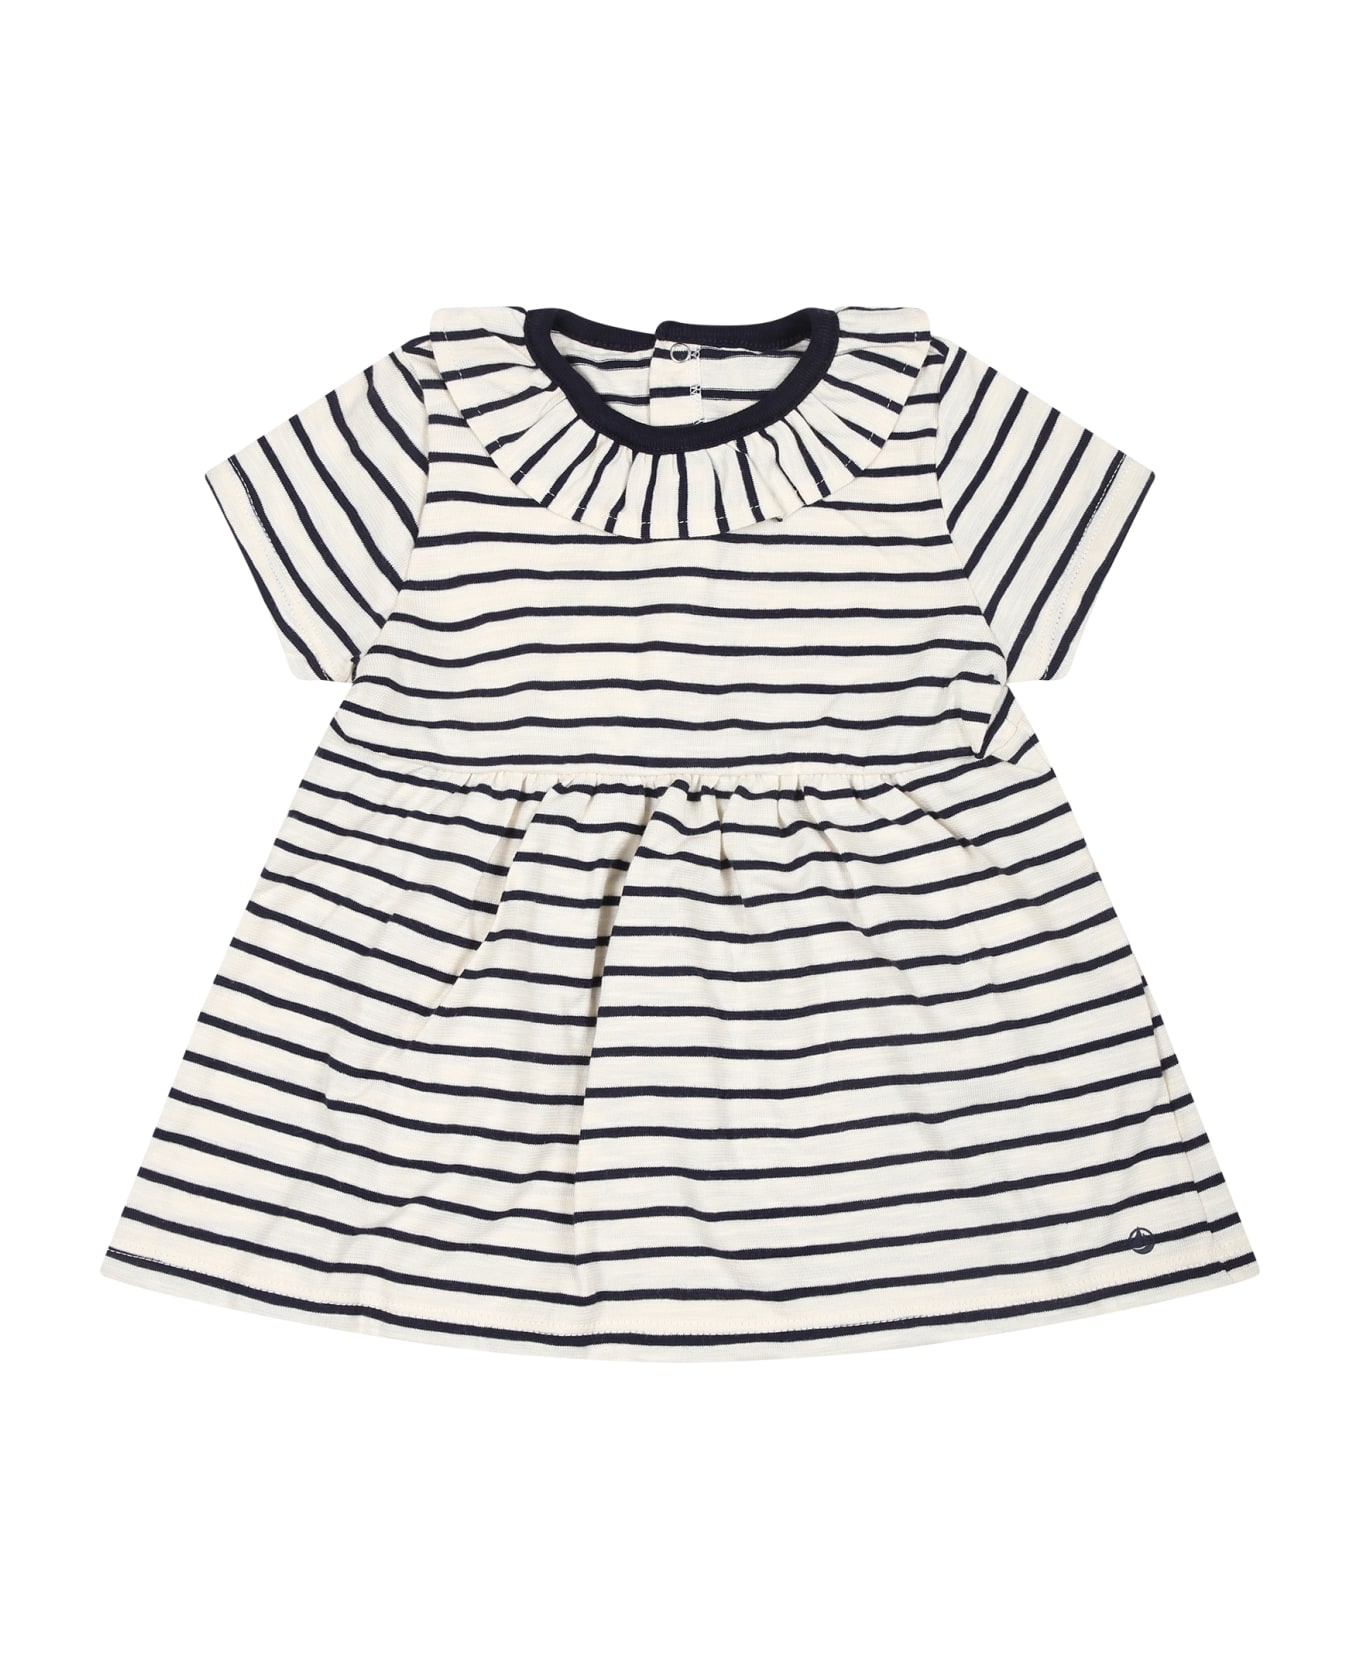 Petit Bateau Ivory Dress For Baby Girl With Blue Stripes - White ウェア